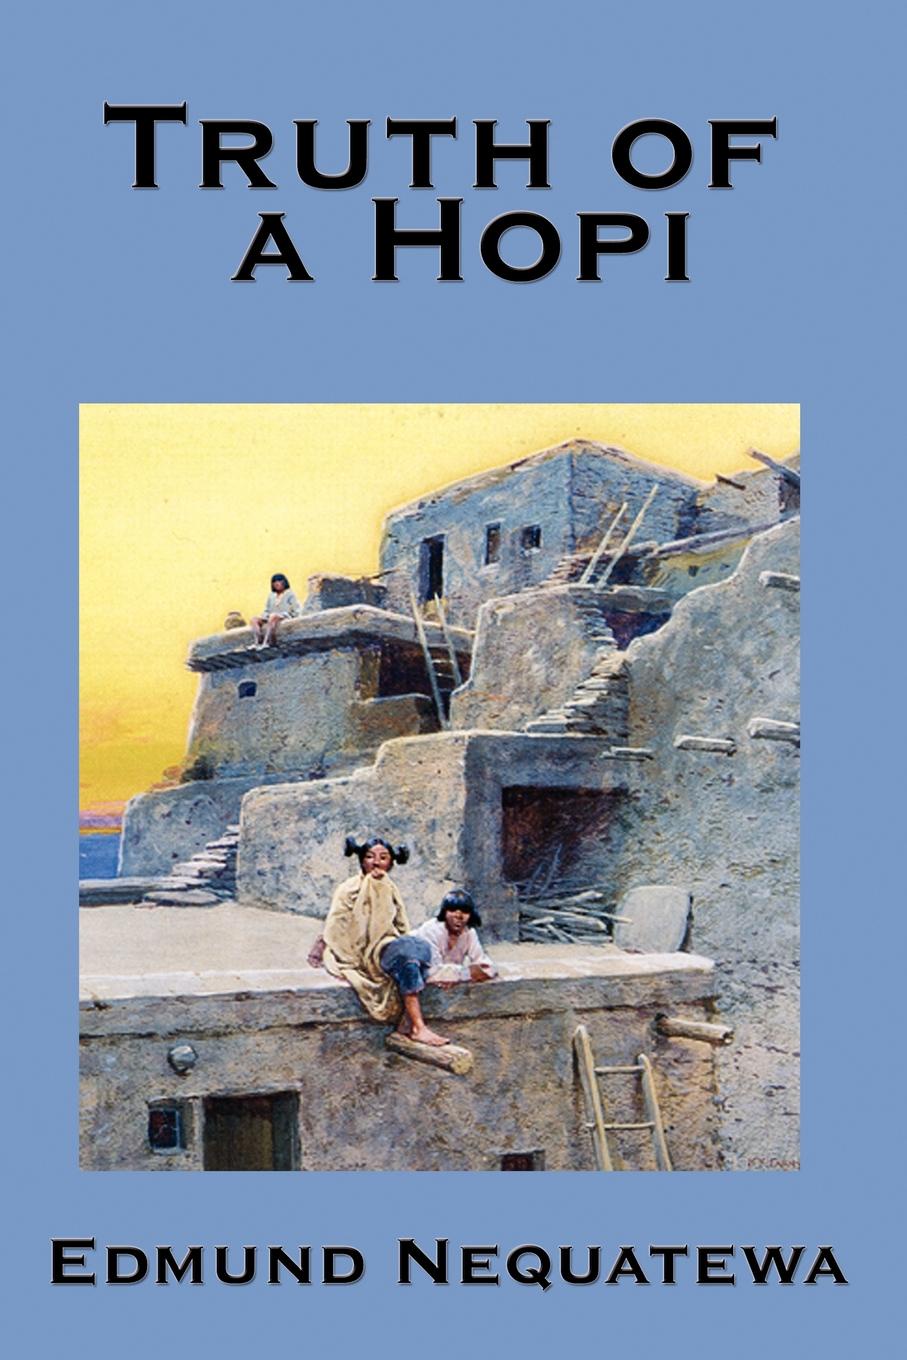 Truth of a Hopi. Stories Relating to the Origin, Myths and Clan Histories of the Hopi